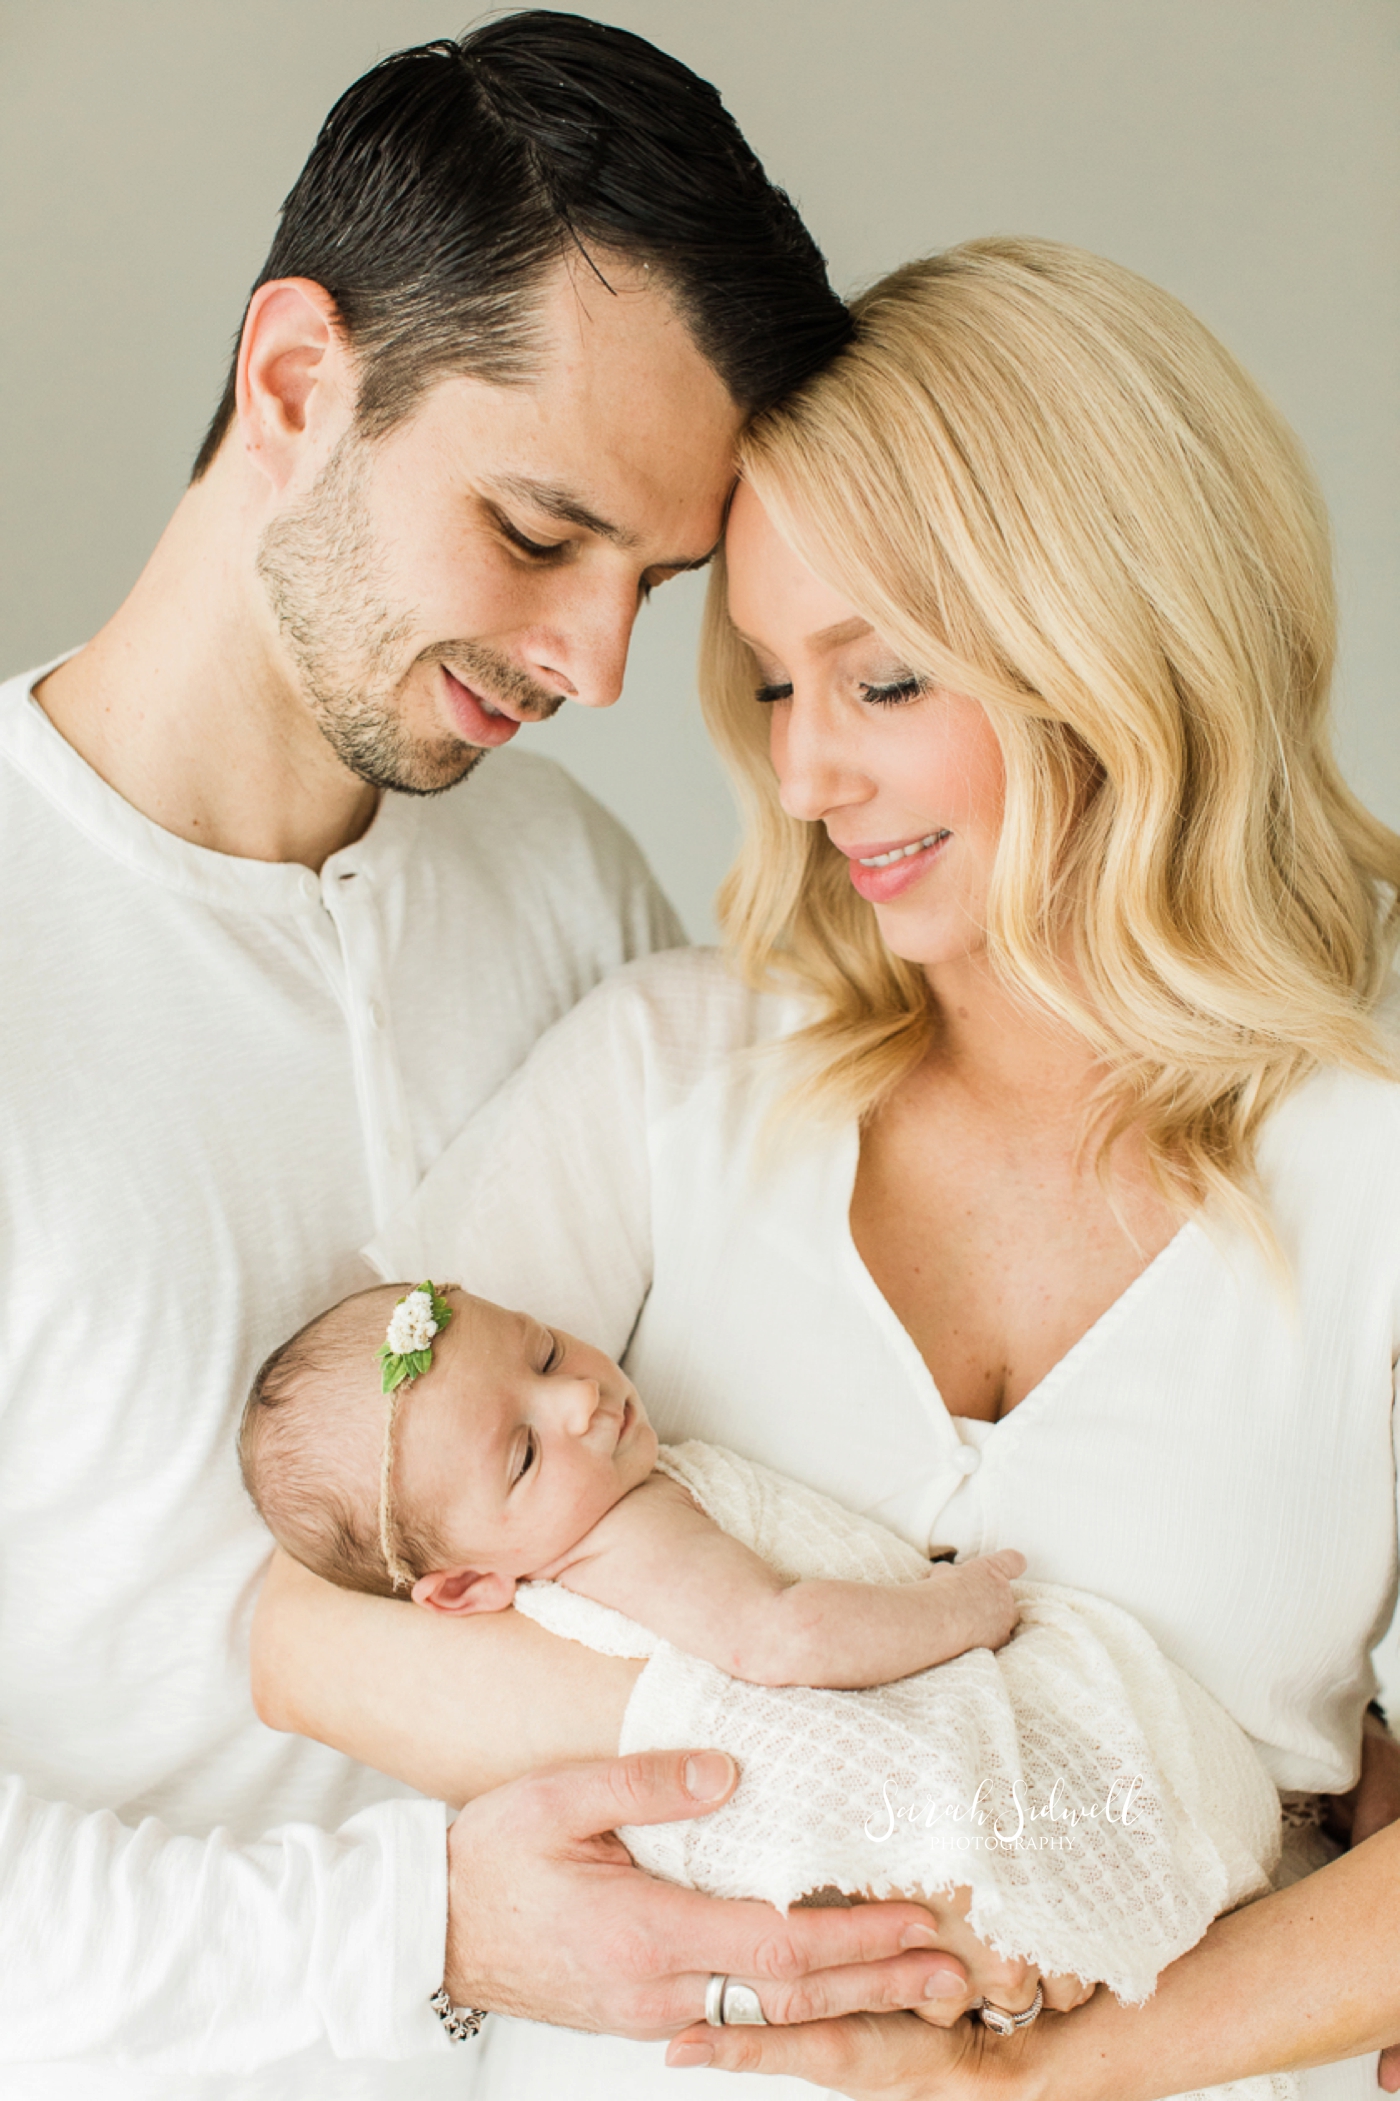 Newborn Session Preview | Sarah Sidwell Photography